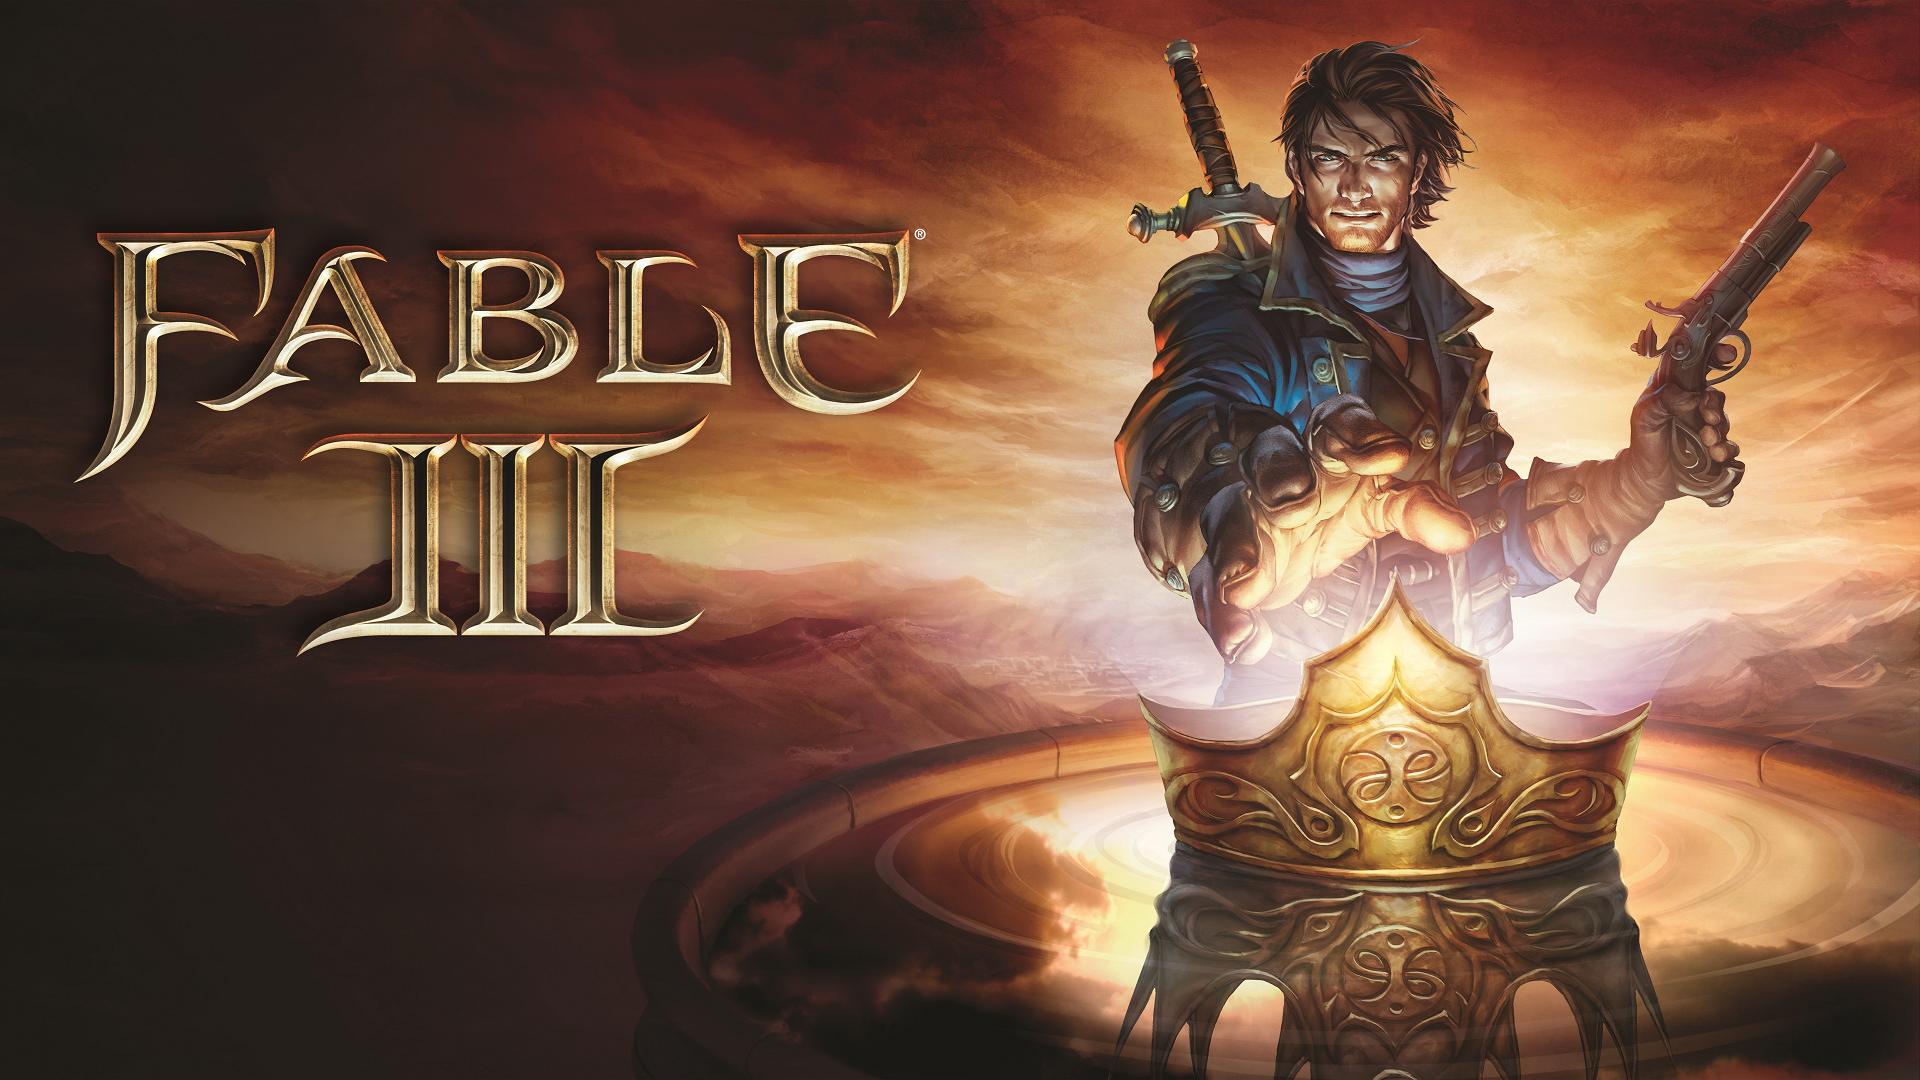 HD wallpaper, Fable Iii, Video Games, Video Game Art, Fable